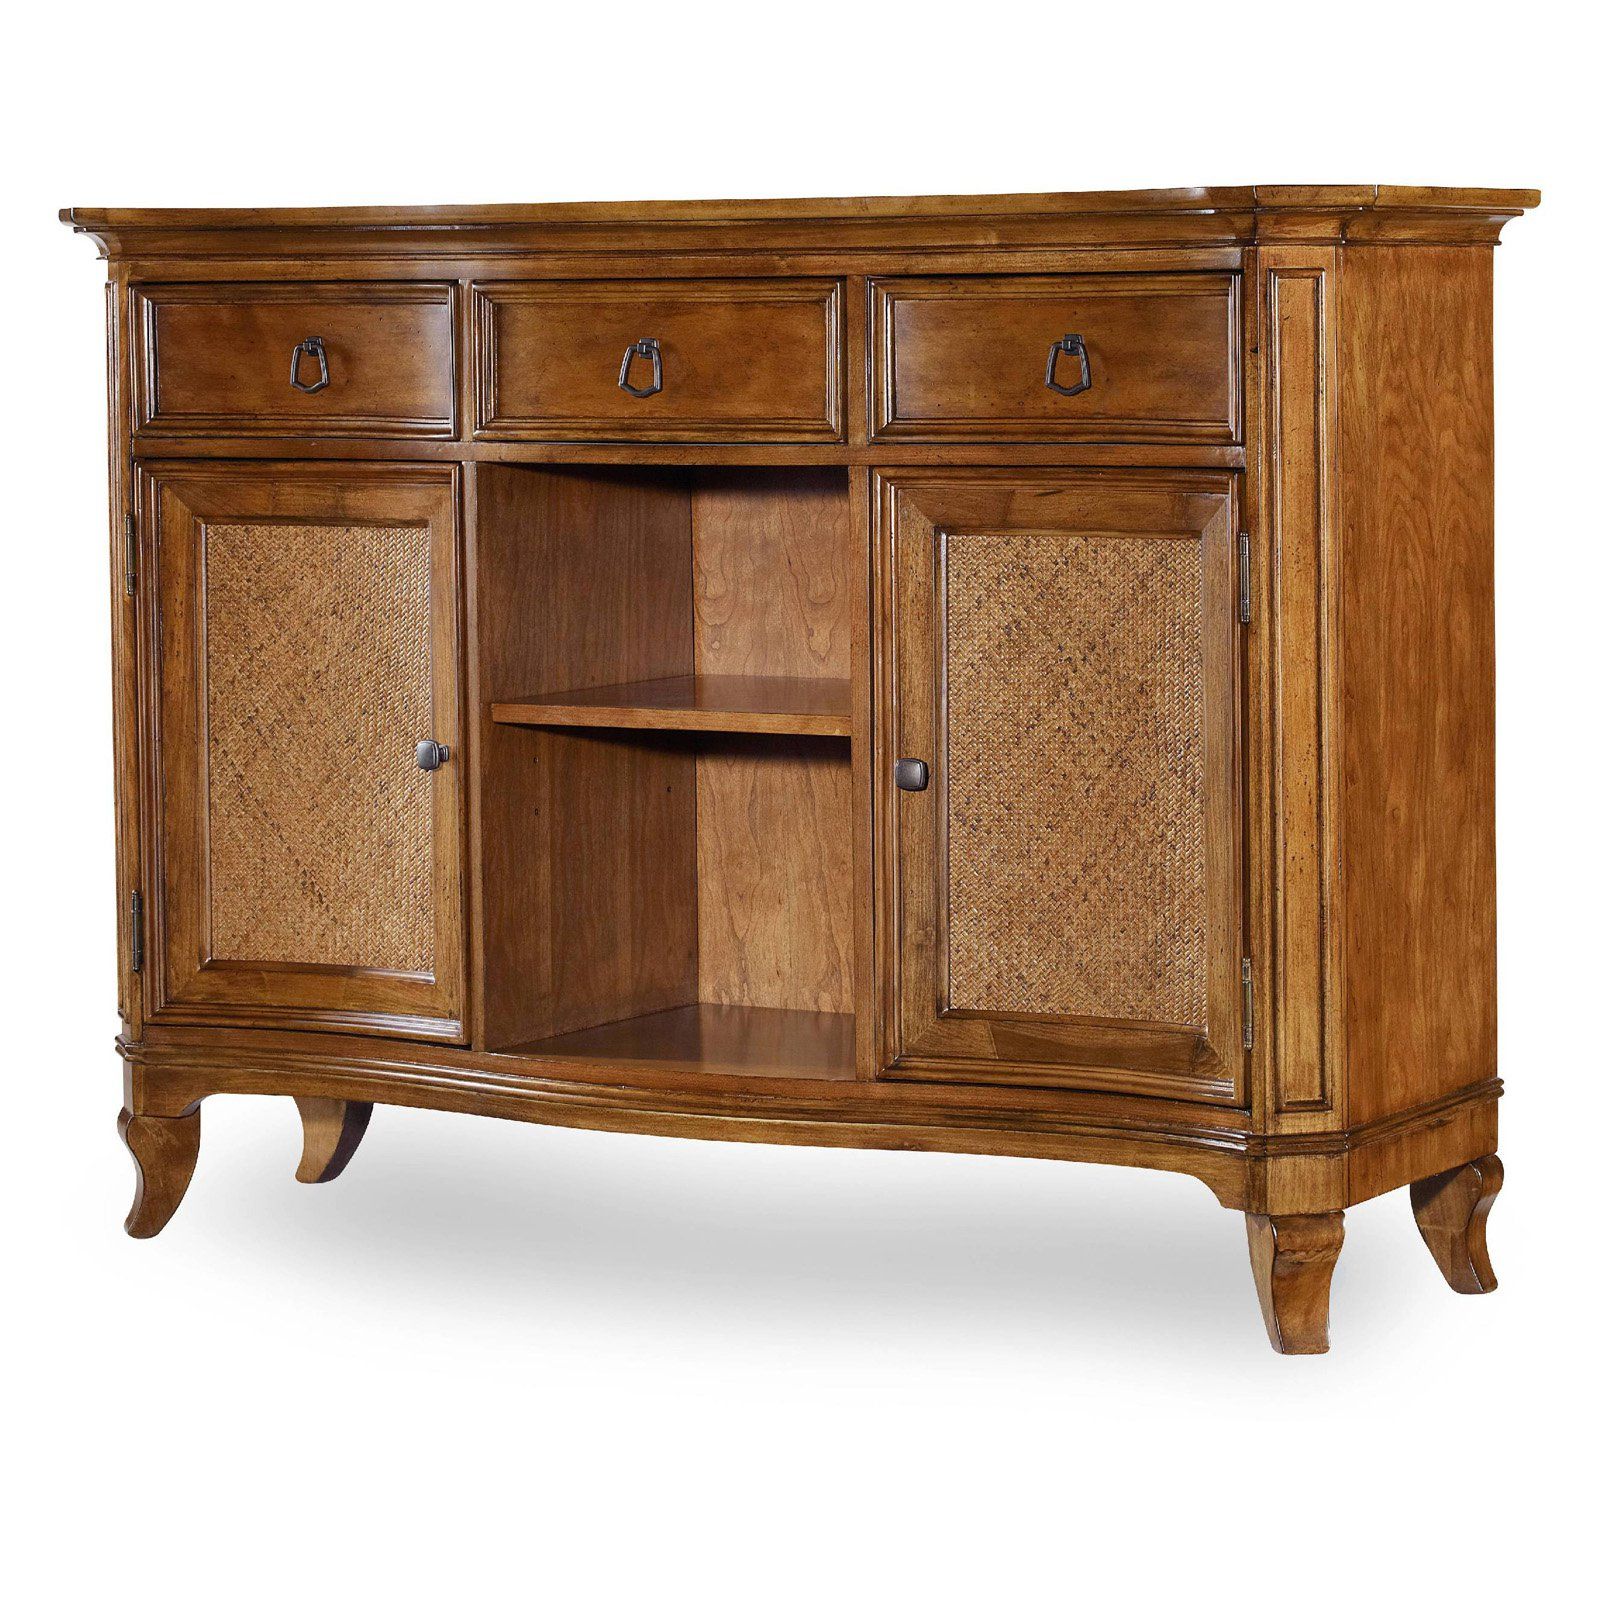 Hooker Furniture Windward 3 Drawer Buffet | Hayneedle Intended For Thatcher Sideboards (Gallery 11 of 20)